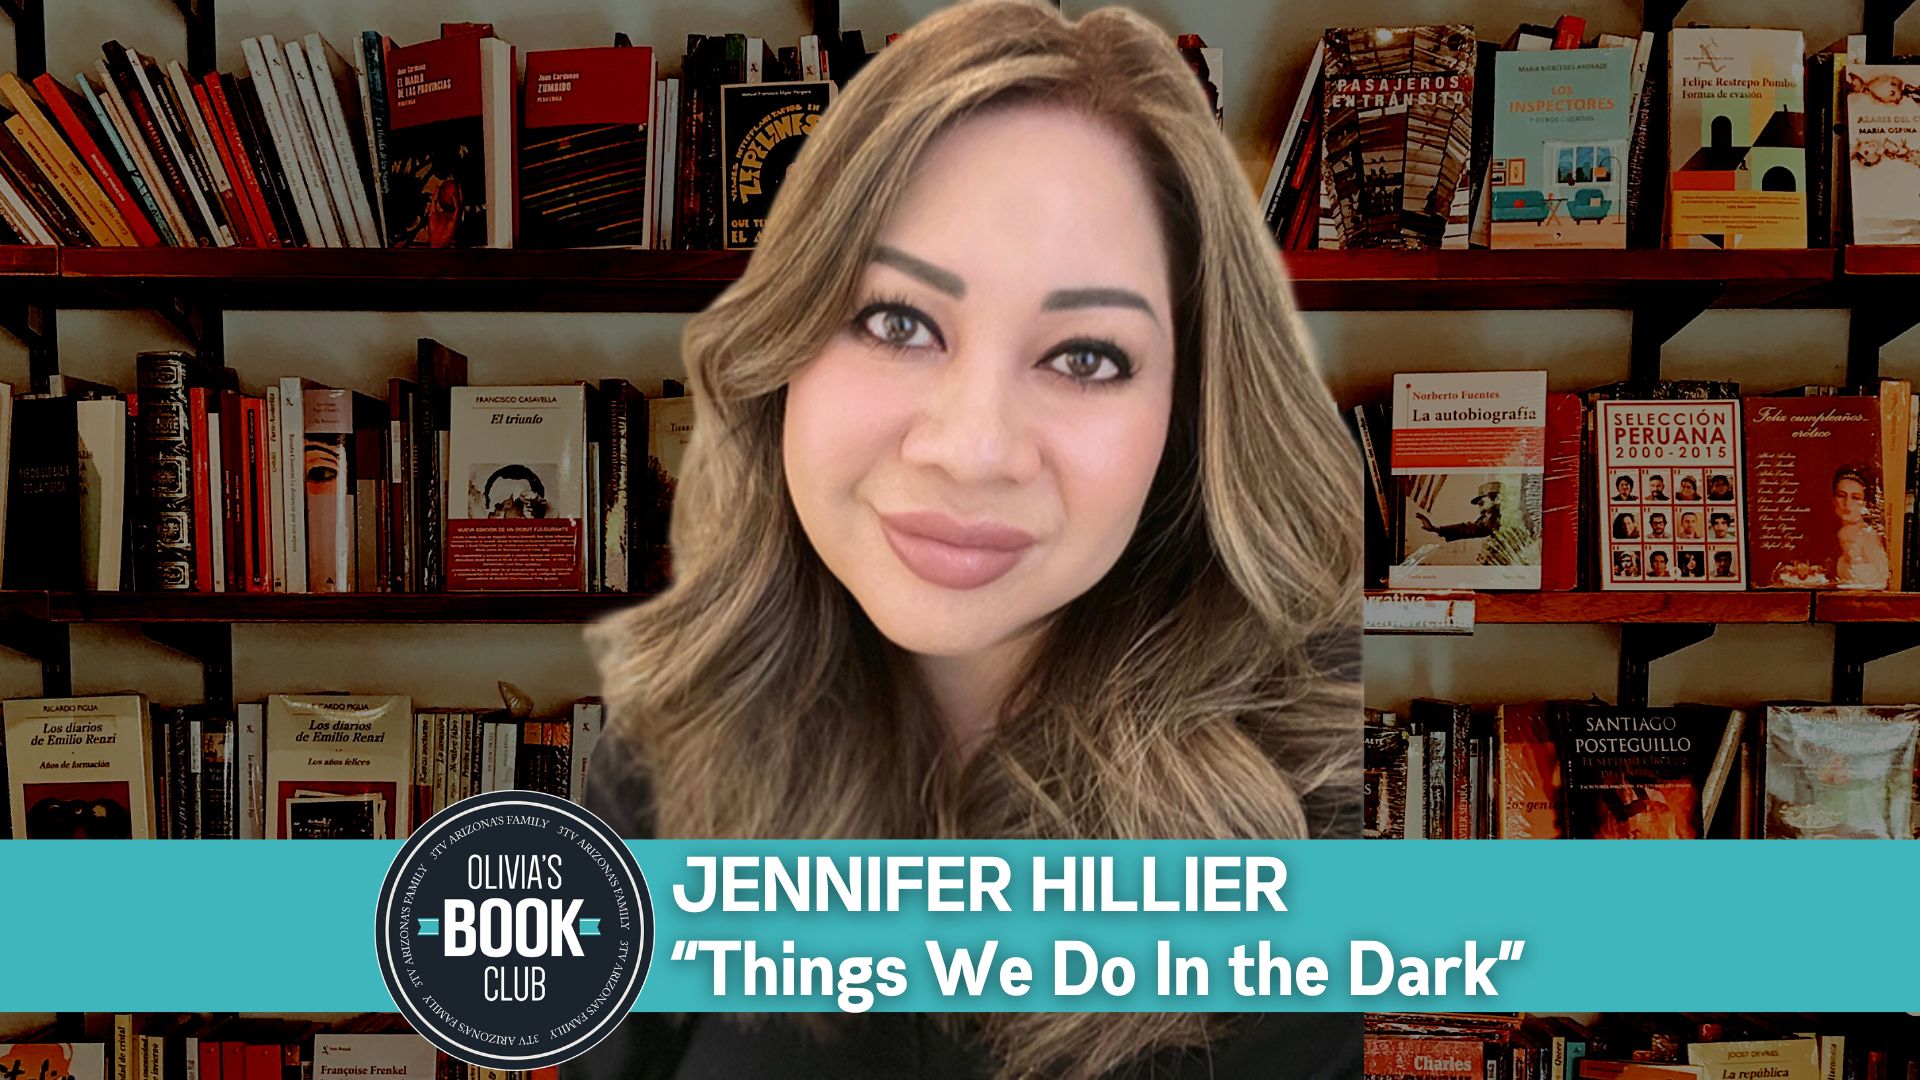 Olivias Book Club Podcast Jennifer Hillier, Things We Do In the Dark photo